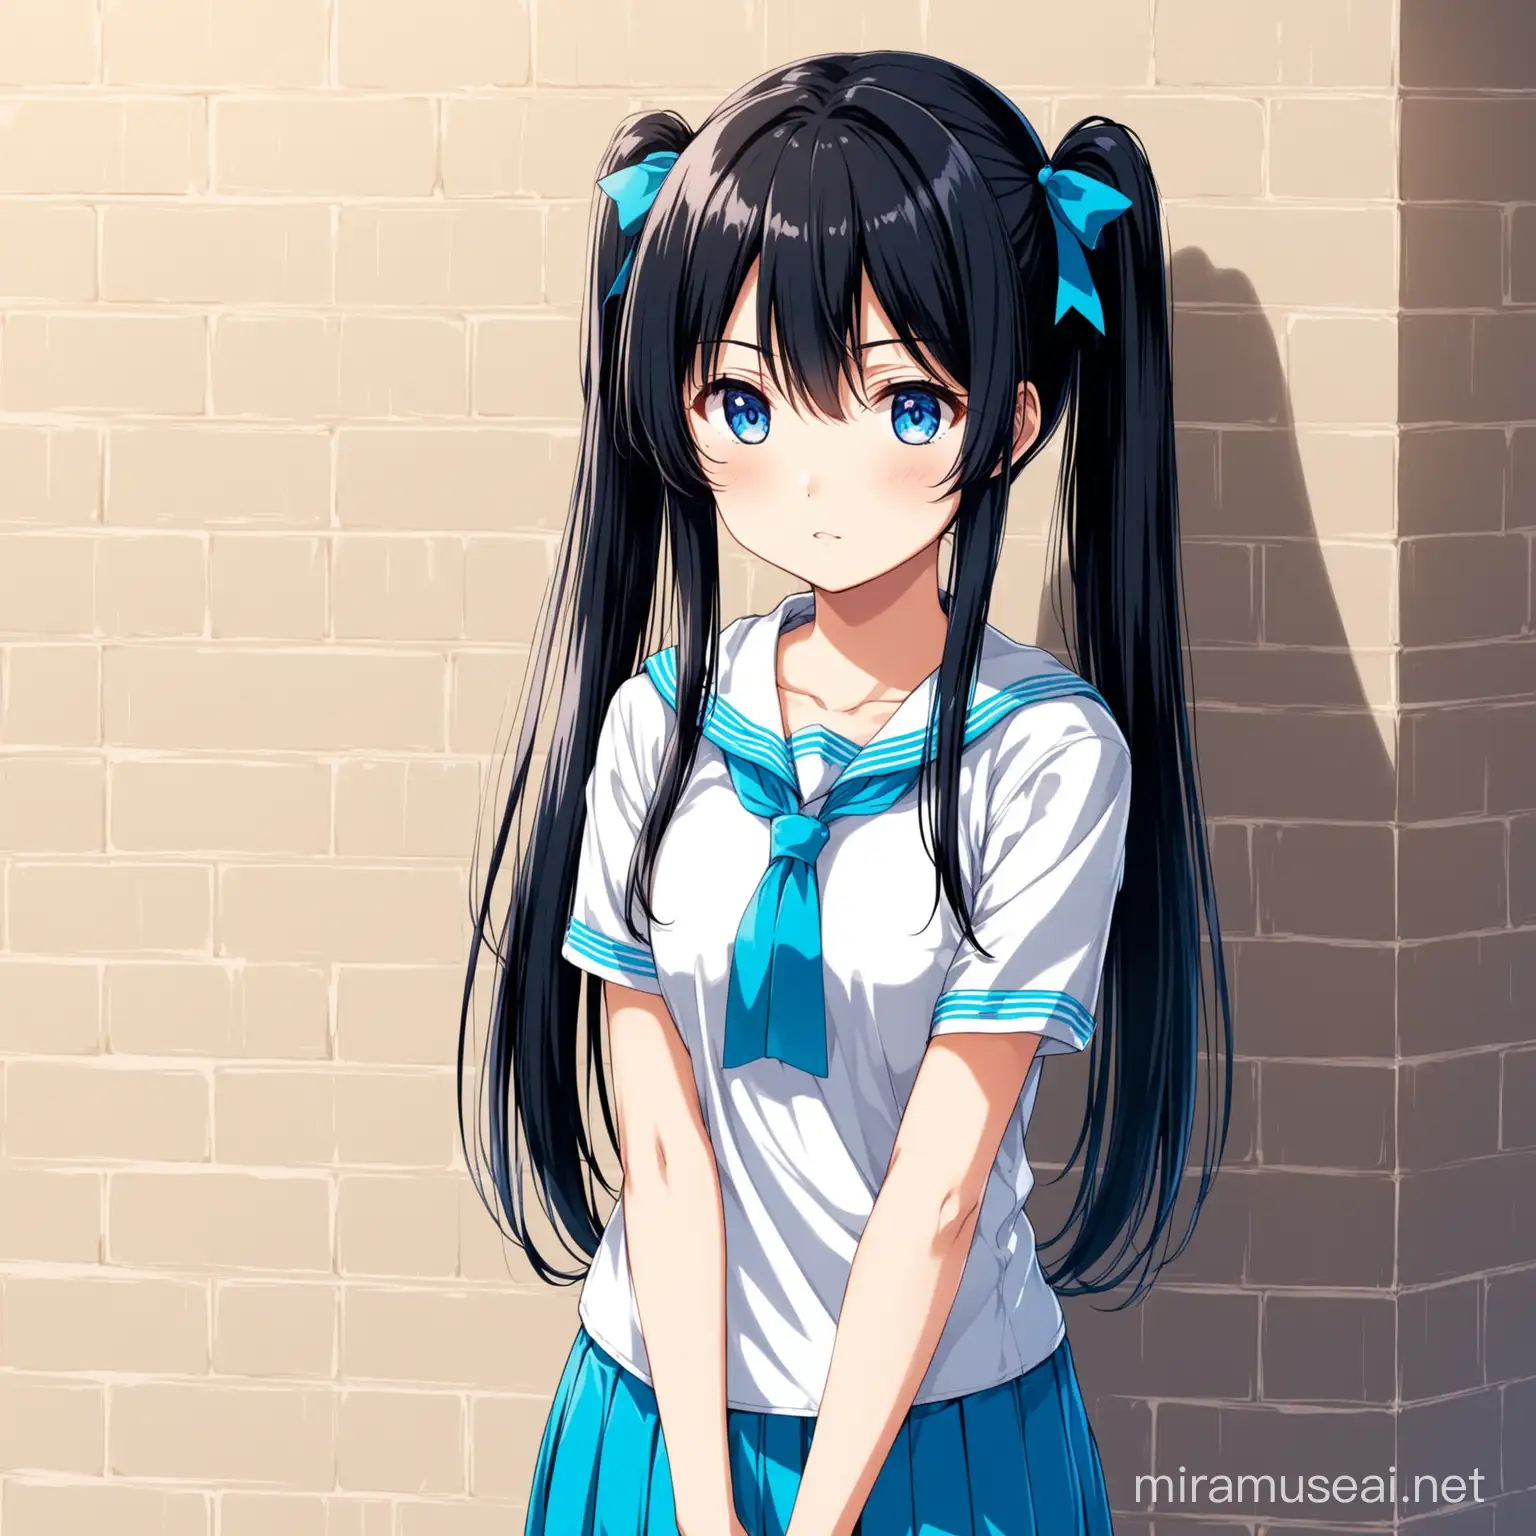 Teenage Anime Girl with Black Hair and Blue Eyes Leaning Against Wall